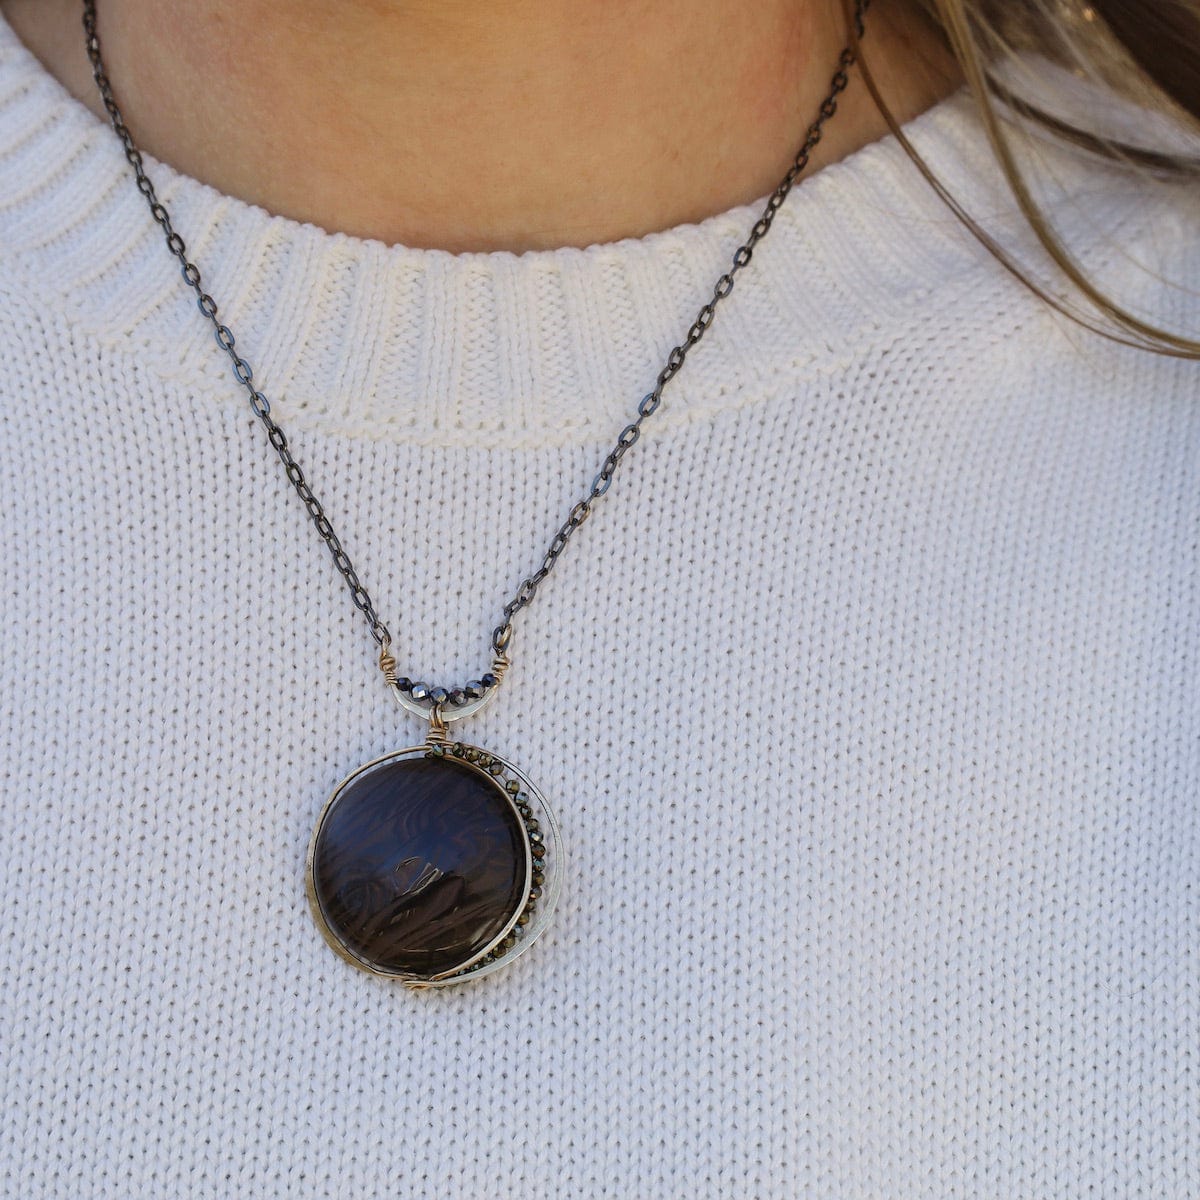 NKL New Moon Necklace